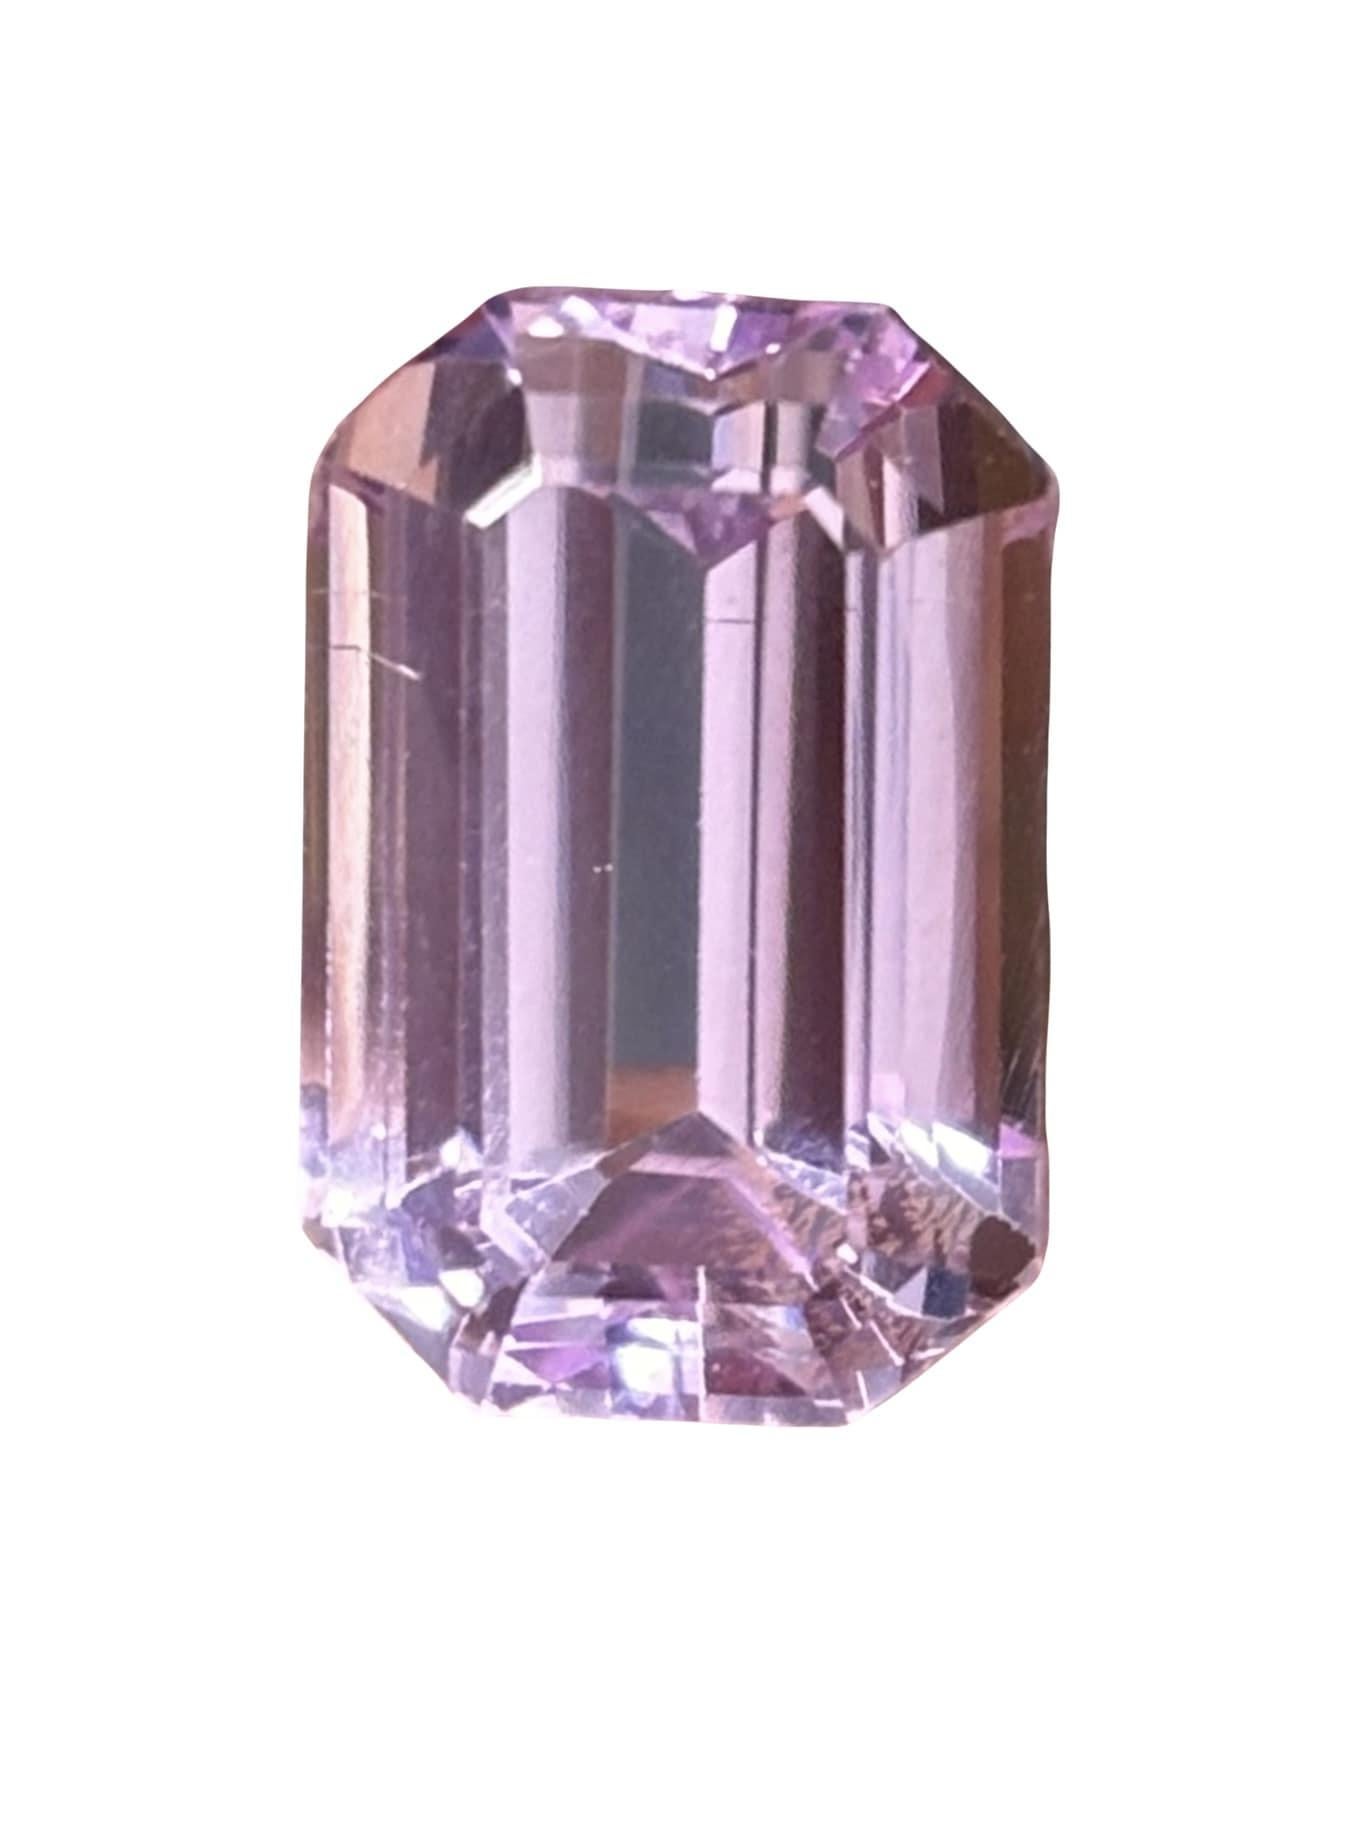 A massive, gorgeous 12.01 Carat Kunzite stone that is beautiful shade of pink. It is completely natural and of good quality. The kunzite piece is cut into perfection in a cushion-cut shape.

The measurements of the Kunzite are 15.28mm x 10.16mm x